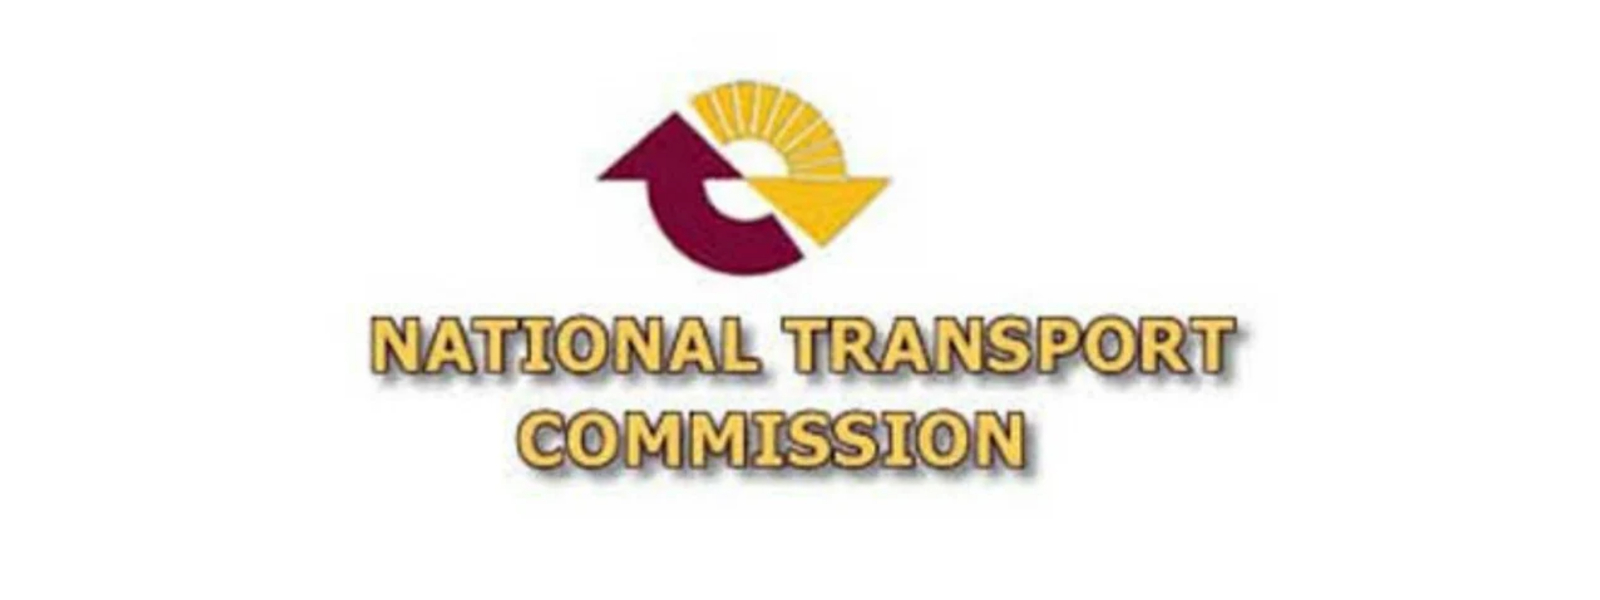 Smart-Cards replacing Road Permits for Buses: NTC